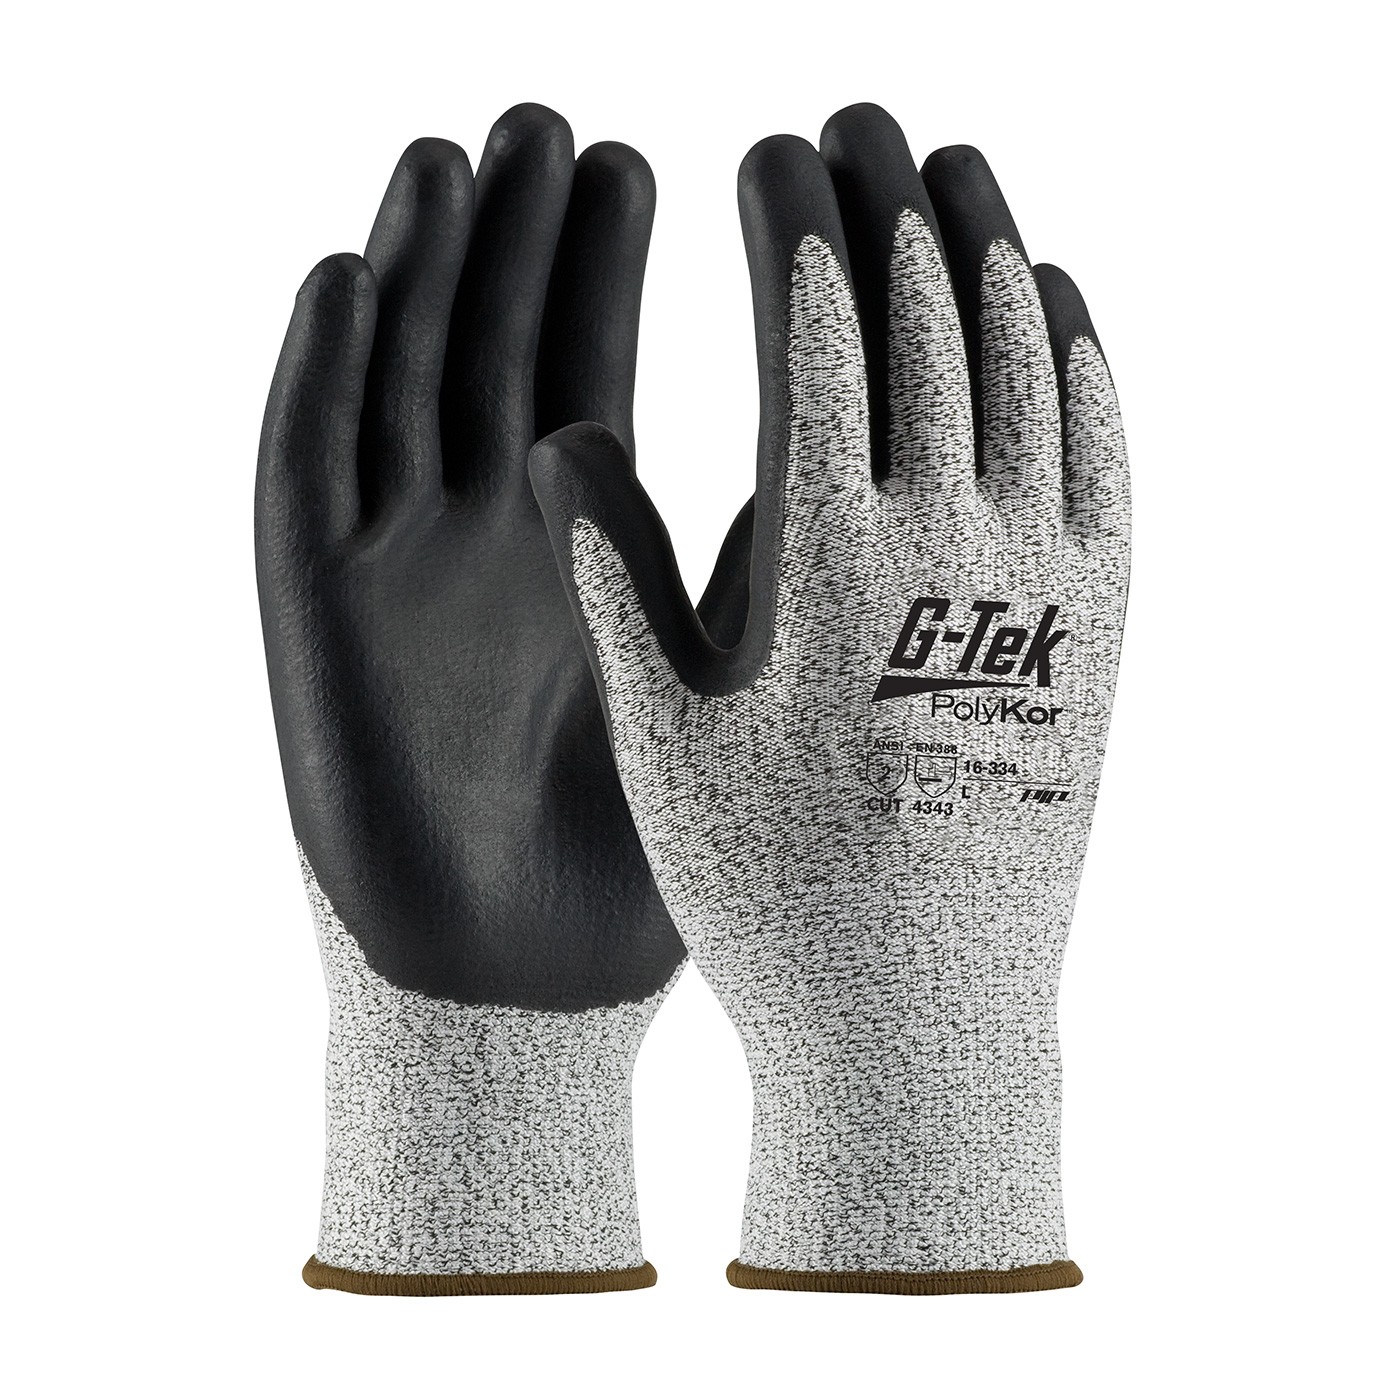 G-Tek® PolyKor® Seamless Knit PolyKor® Blended Glove with Nitrile Coated Foam Grip on Palm & Fingers  (#16-334)